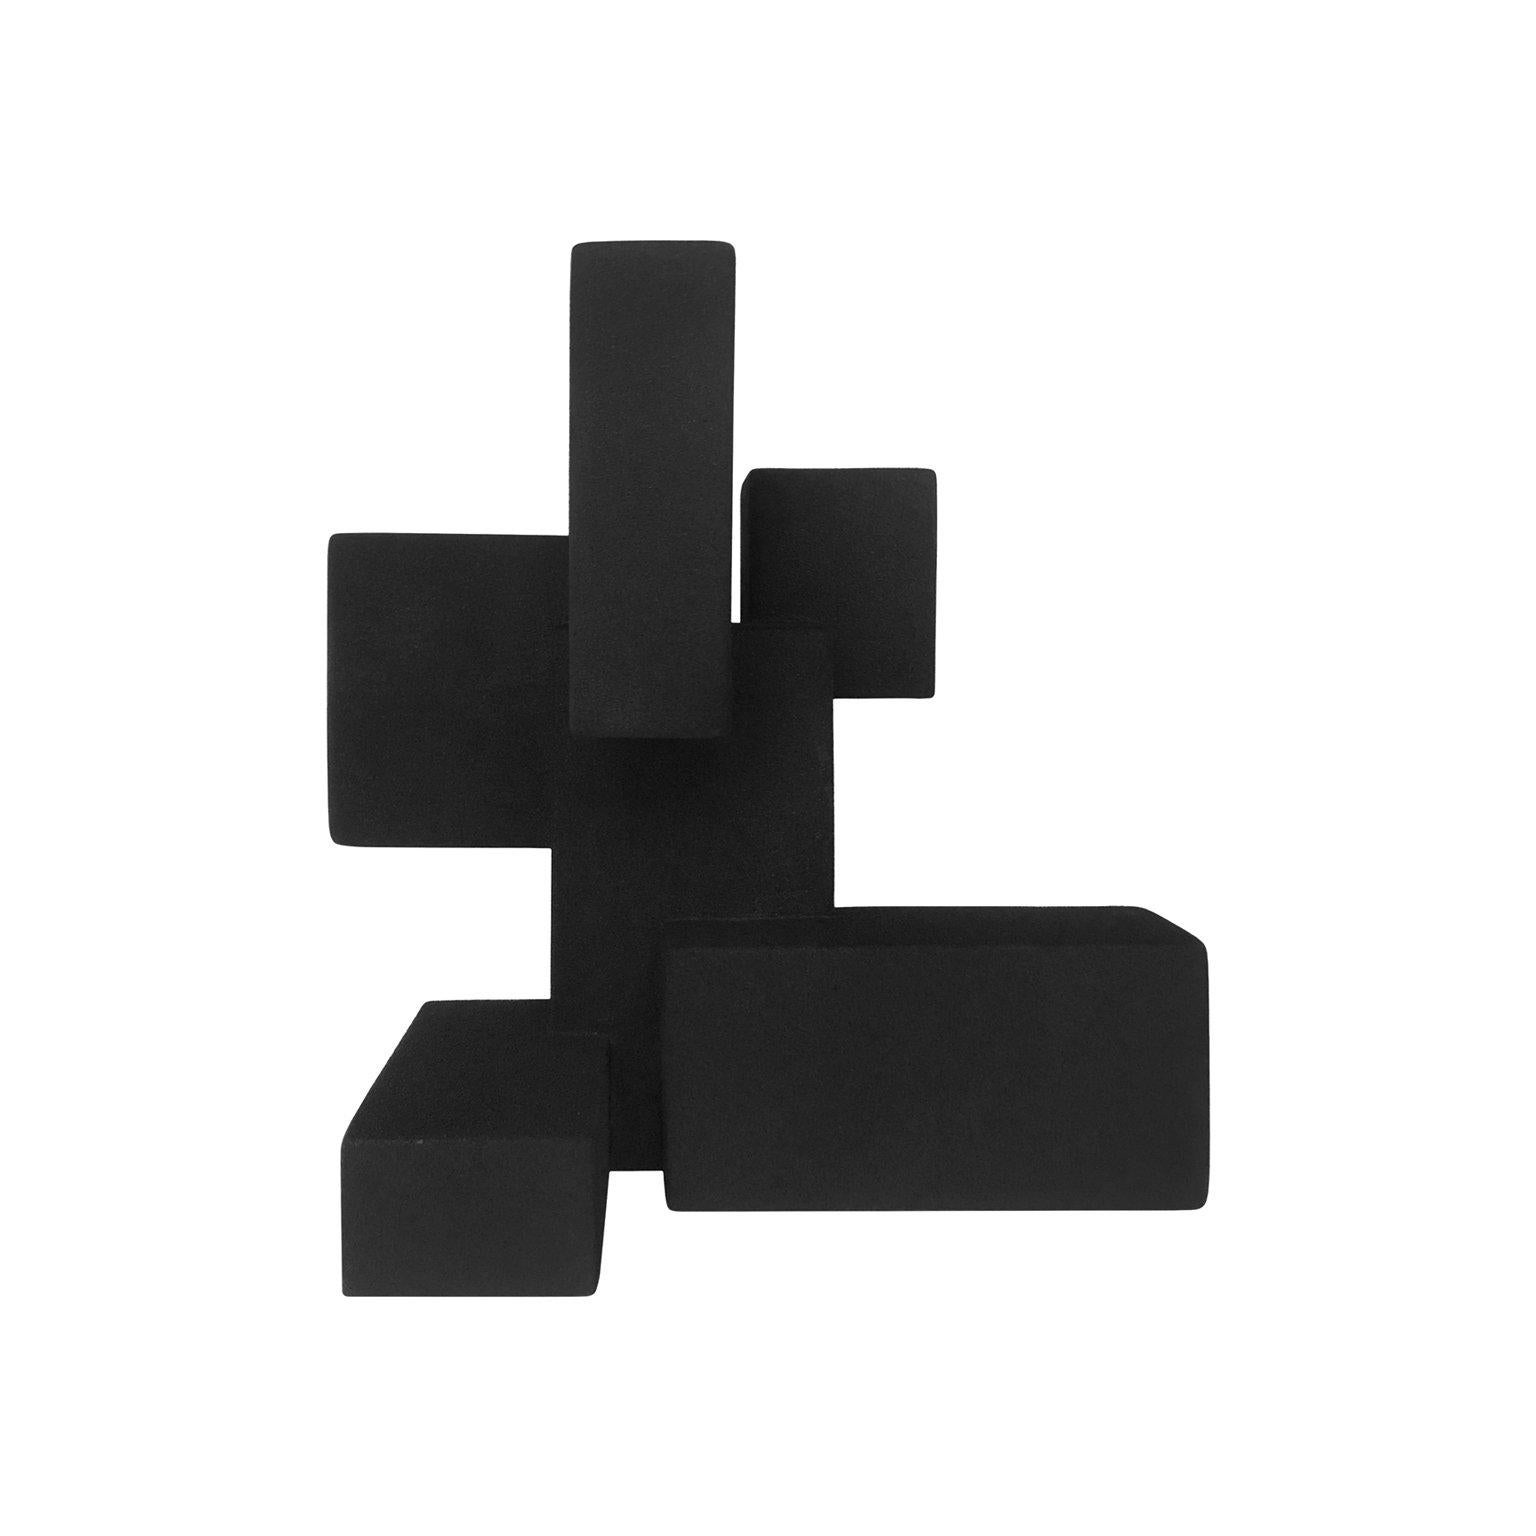 American Abstract Sculpture in Matte Black Rubber Finish Dan Schneiger For Sale